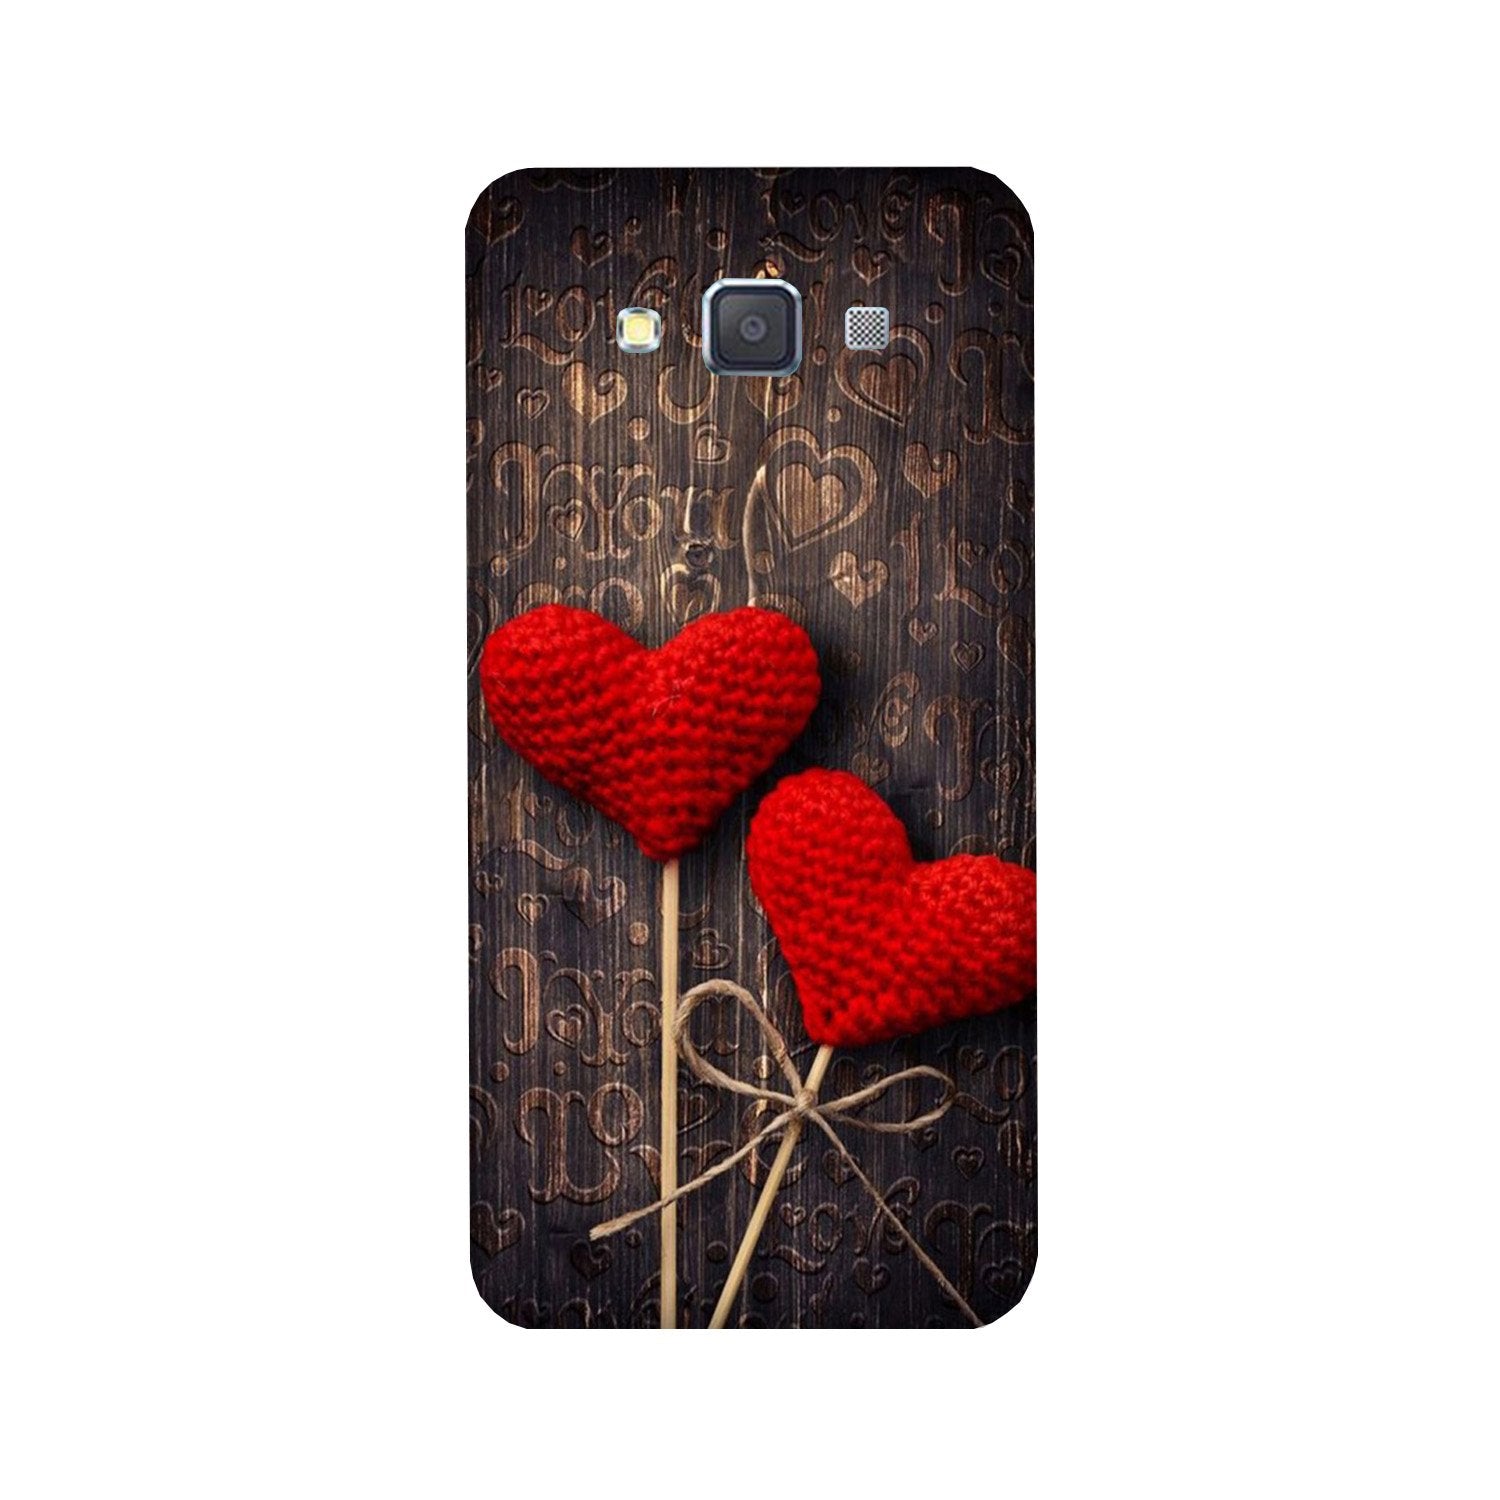 Red Hearts Case for Galaxy Grand Max